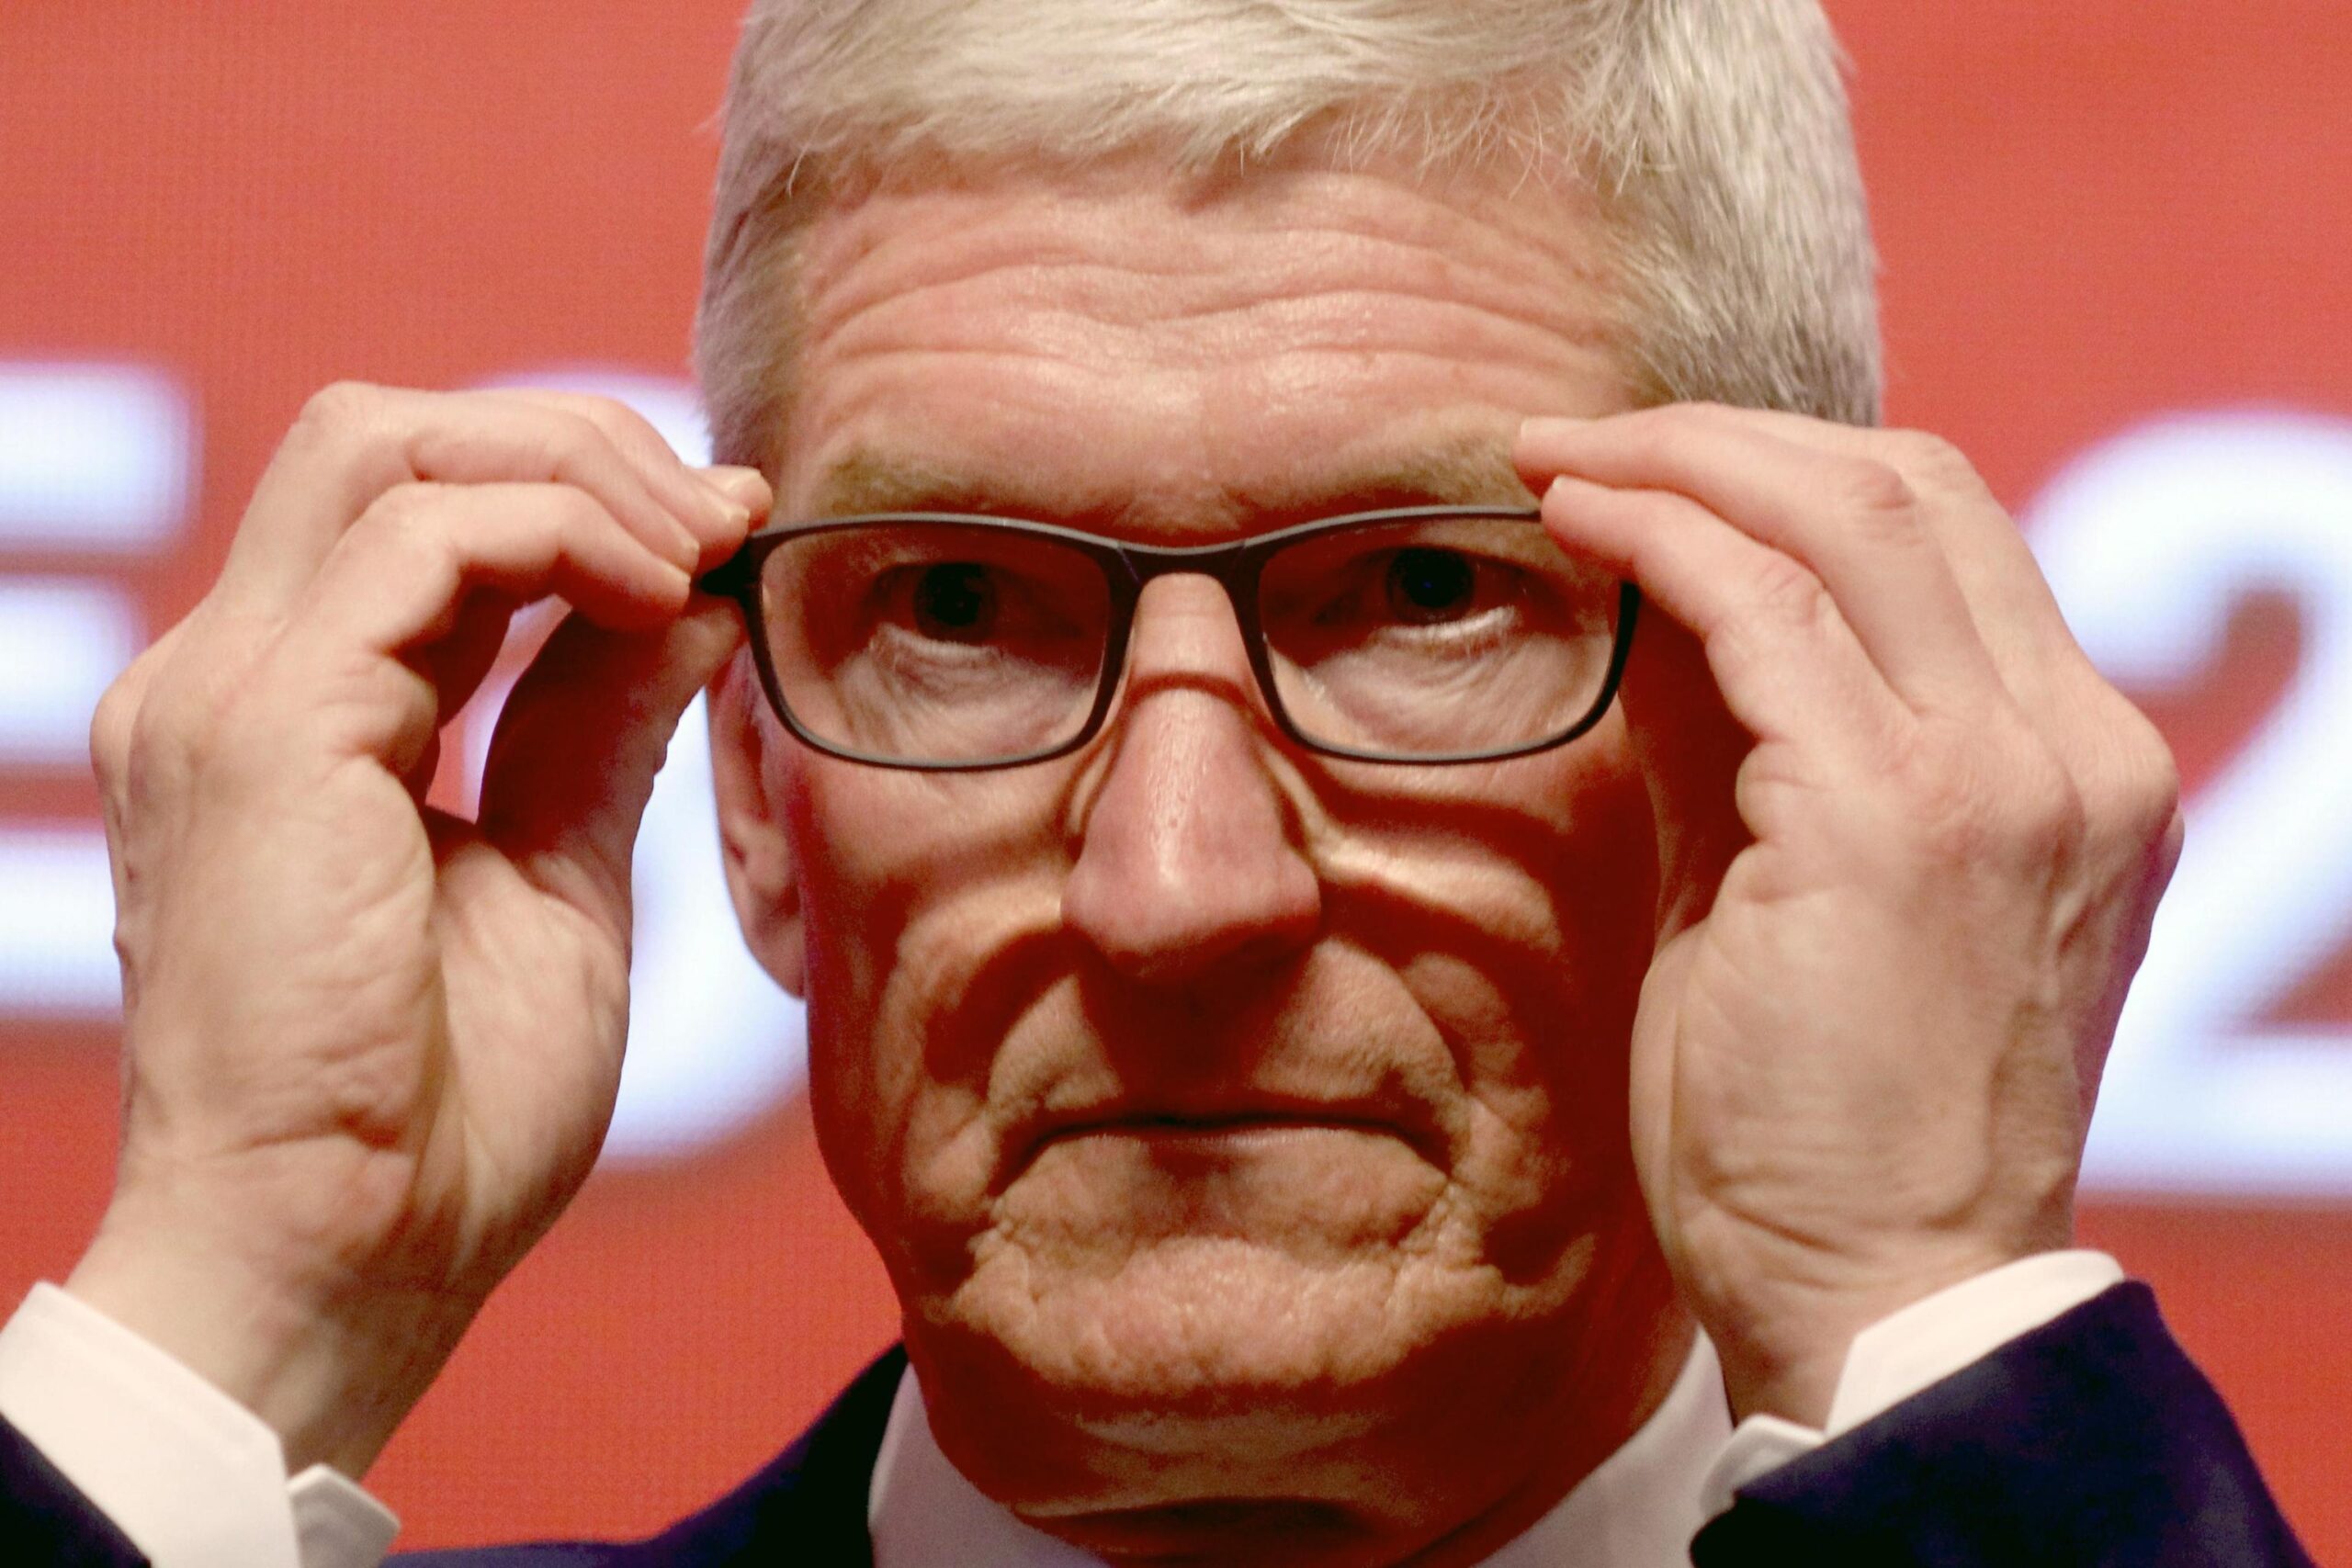 epa07457633 Apple CEO Tim Cook reacts during the Economic Summit held for the China Development Forum in Beijing, China, 23 March 2019. During the event Cook urged China to open up its economy.  EPA/NG HAN GUAN / POOL